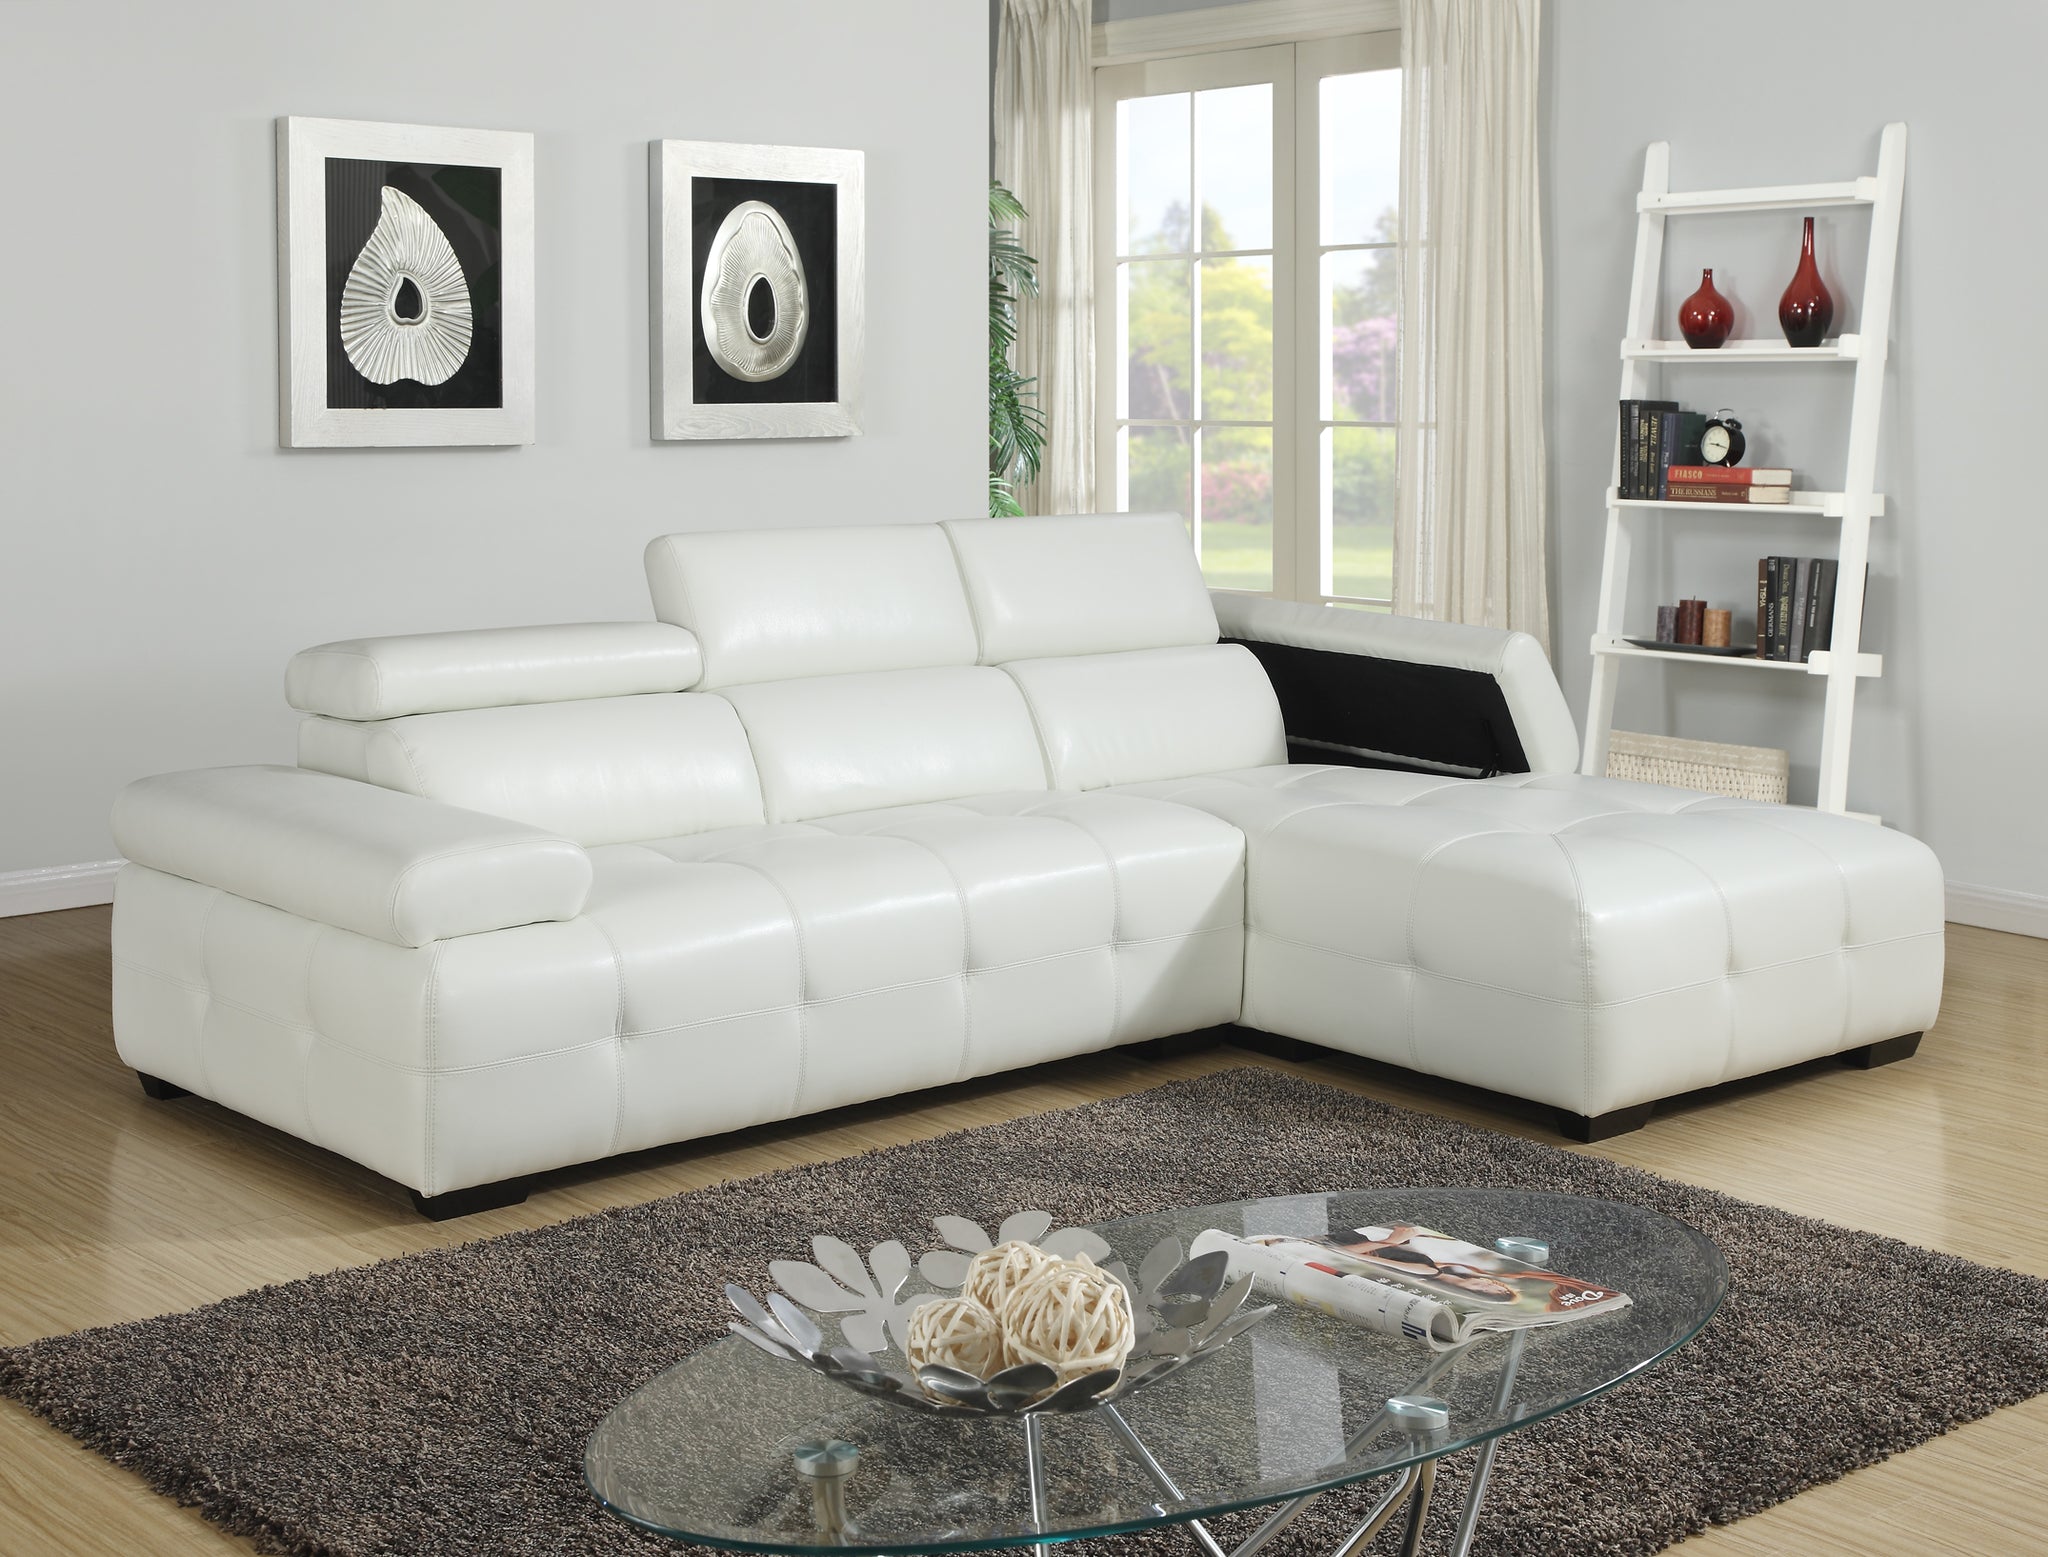 RIO - SECTIONAL WITH ADJUSTABLE HEADREST AND ARM REST STORAGE